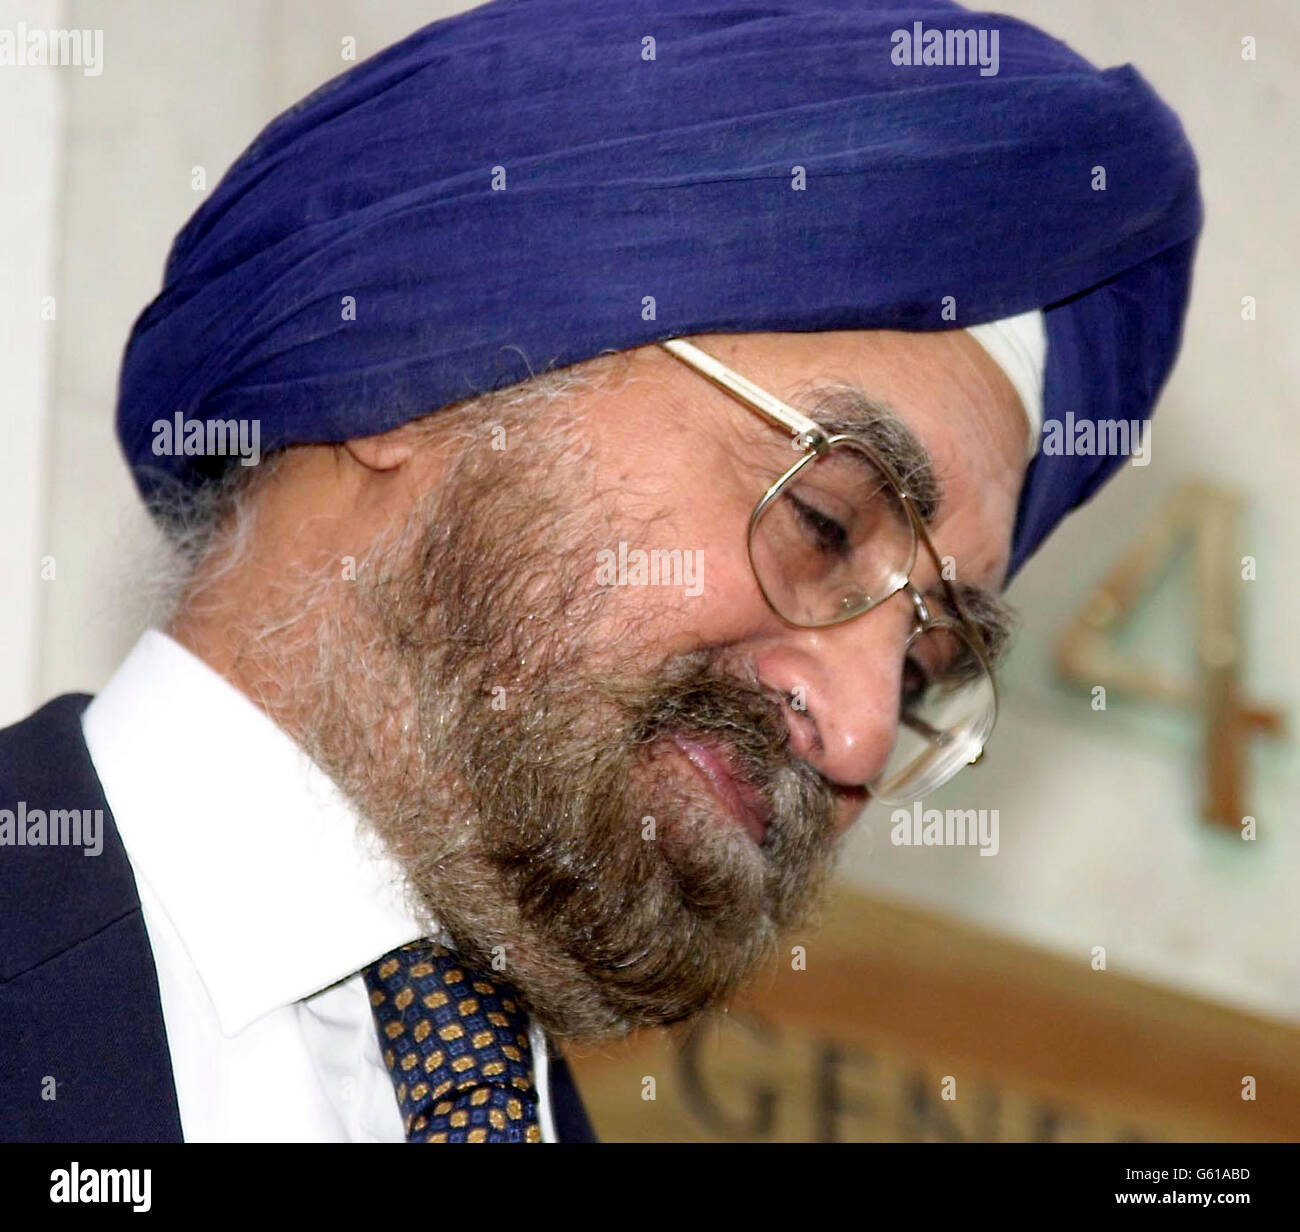 Dr Bhagat Makkar, 62, leaving the General Medical Council, Hallam Street, London, after being found guilty of selling human organs and being struck off. He was found guilty by the disciplinary committee after he was accused of illegally trafficking human organs. * The committee has heard how Dr Makkar had told an undercover journalist posing as a client that he would have 'no problem' in obtaining a kidney from a live donor in exchange for a fee. Stock Photo